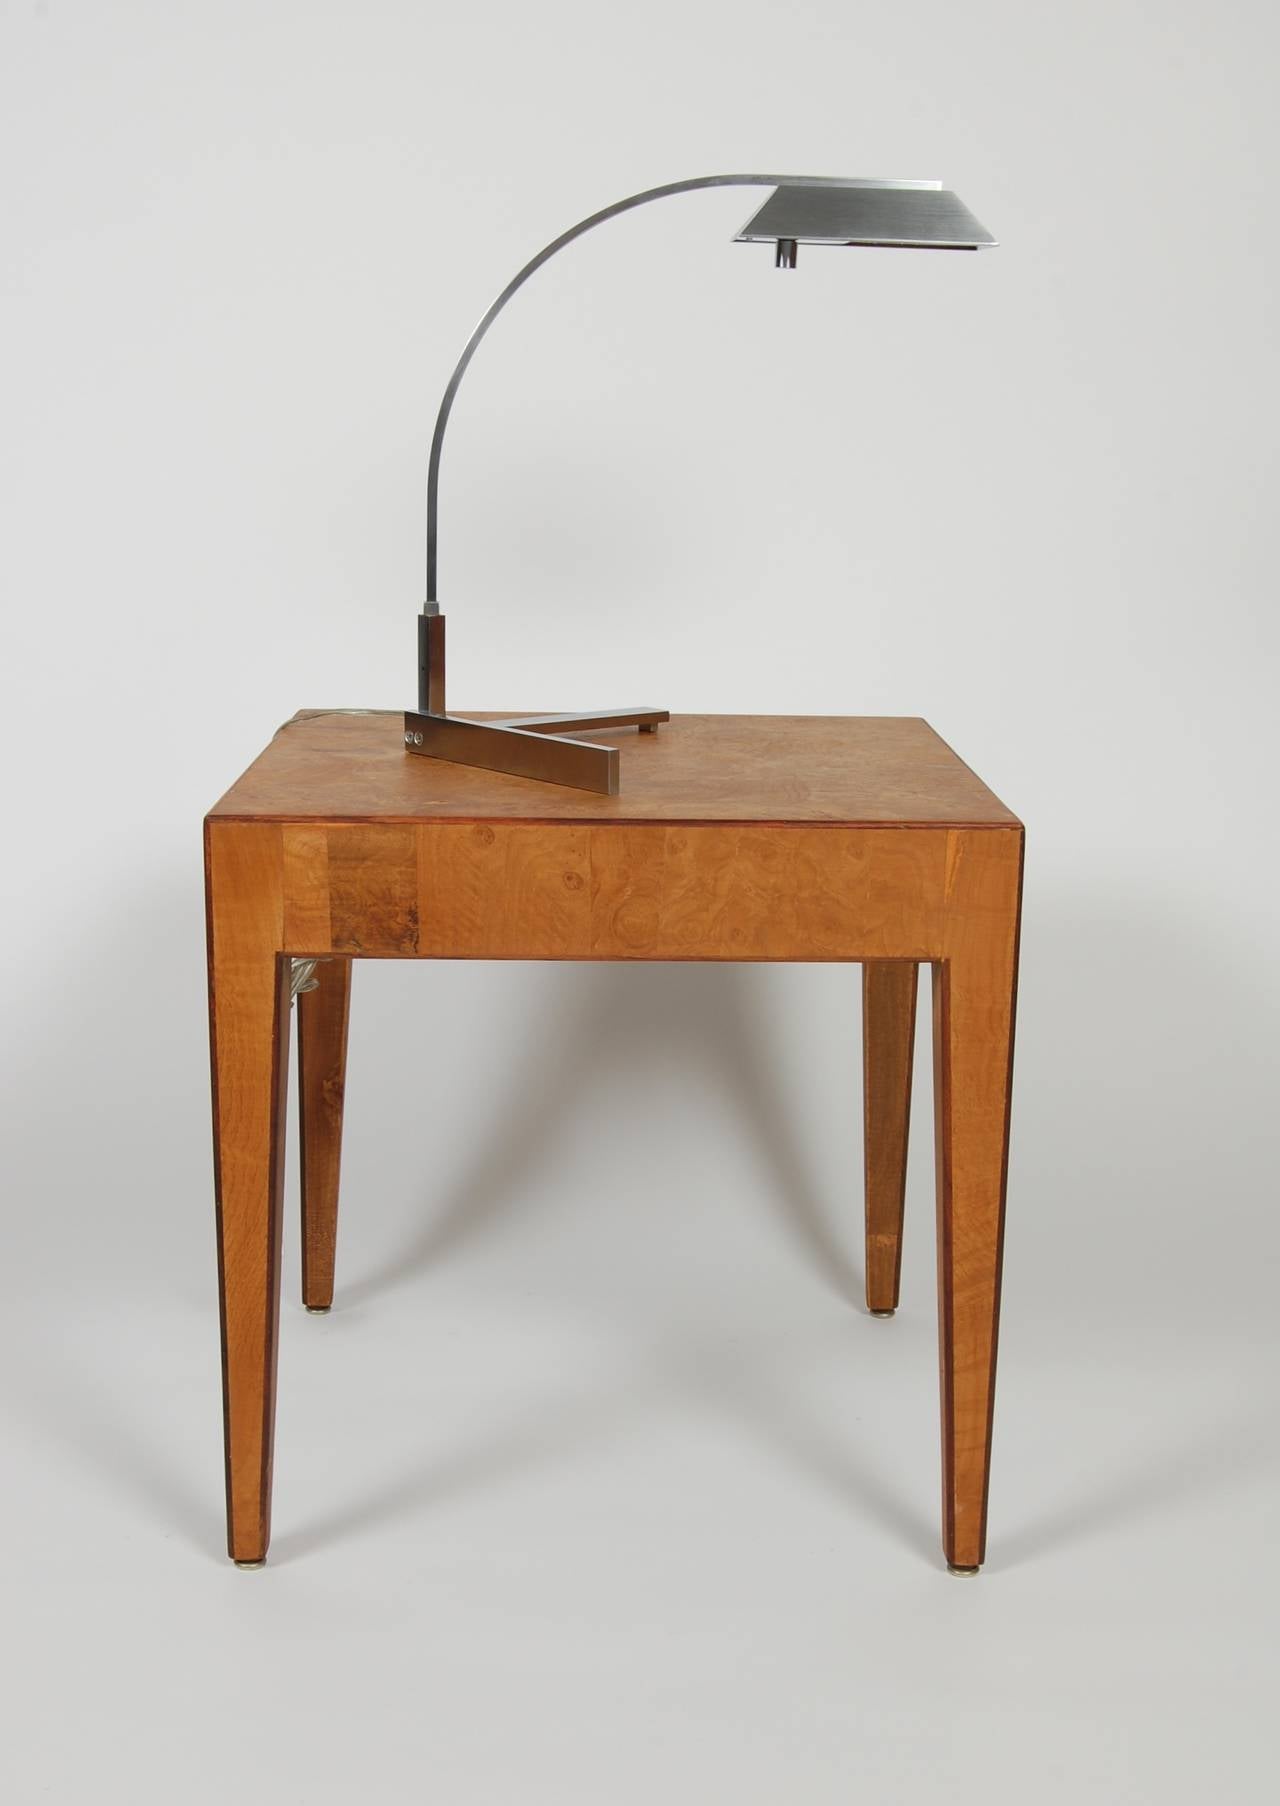 Plated Modernist Casella Table Lamp